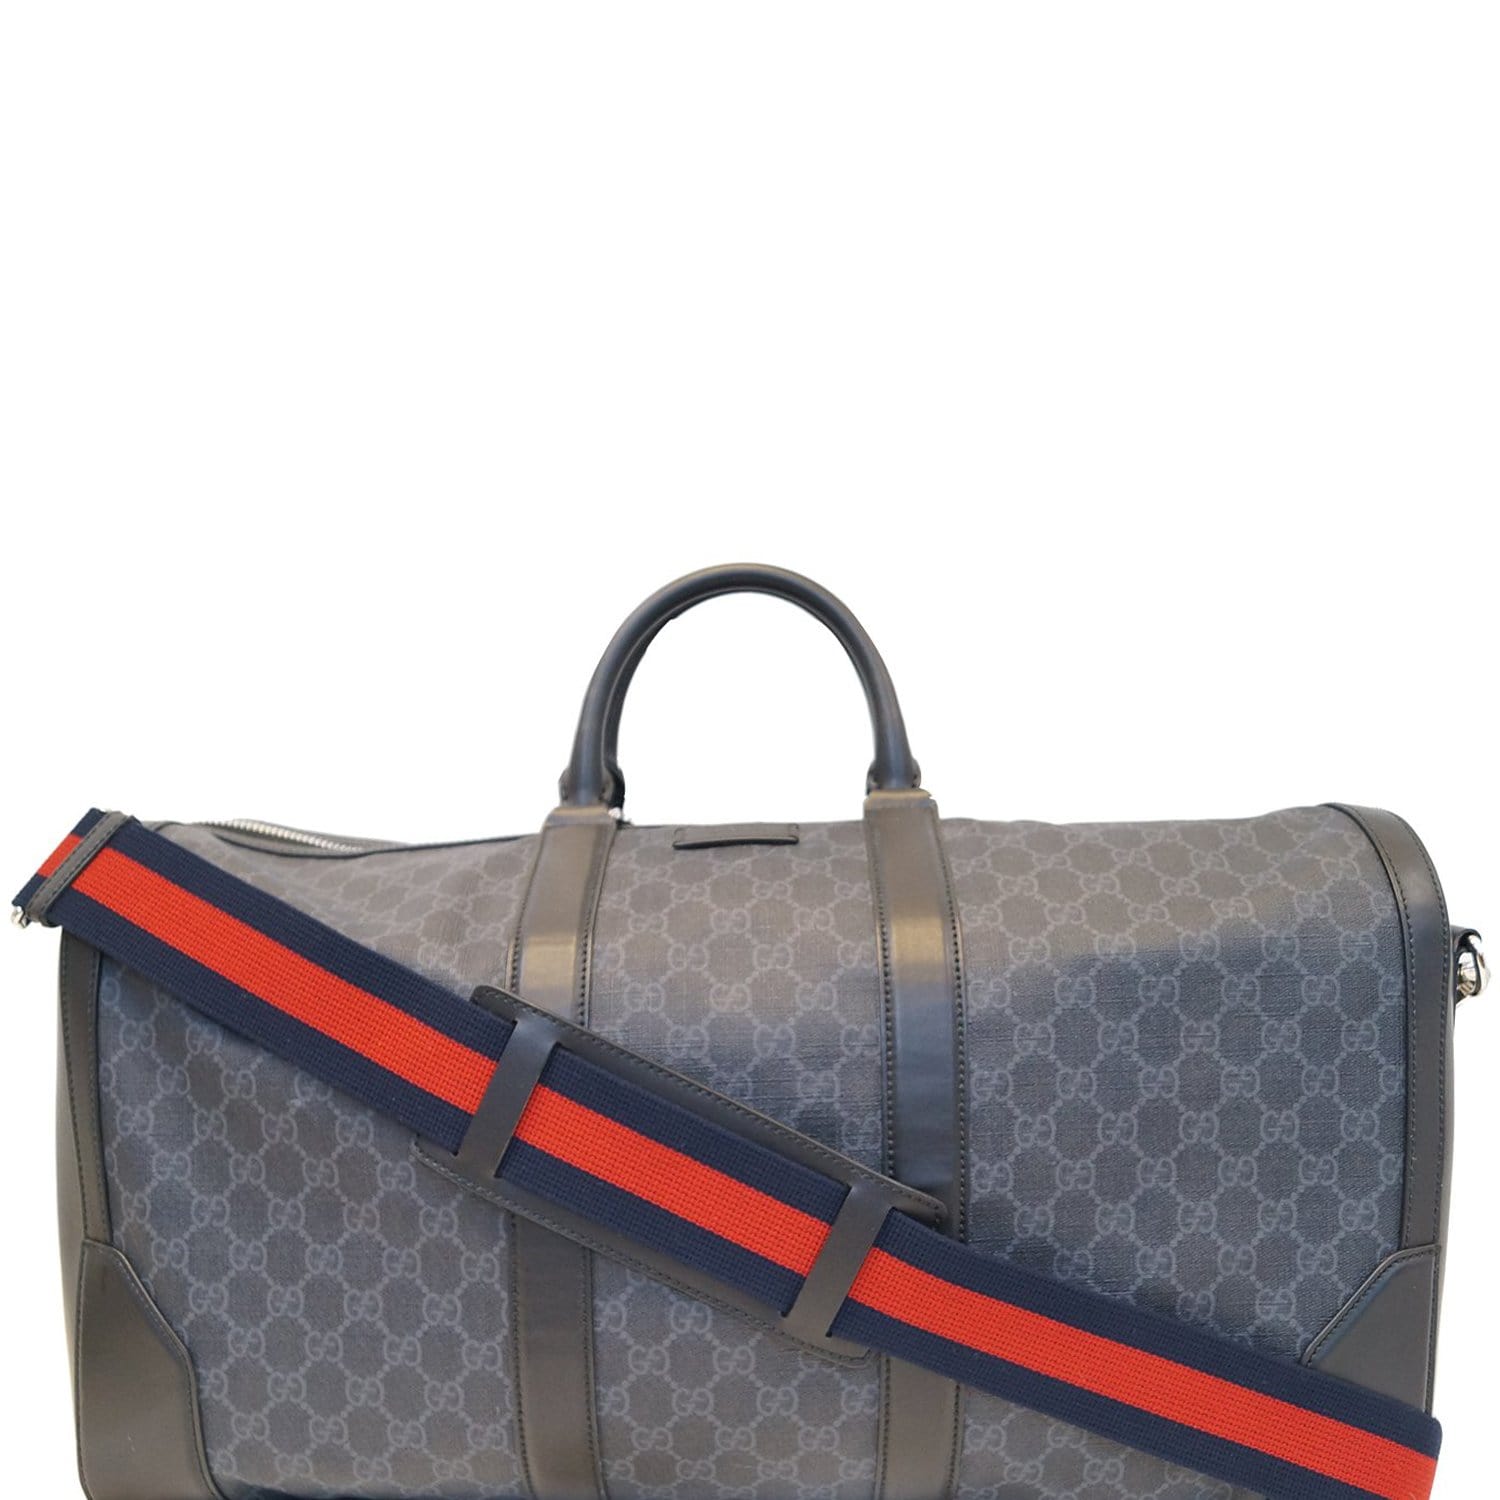 supreme bag - Luggage Prices and Promotions - Travel & Luggage Oct